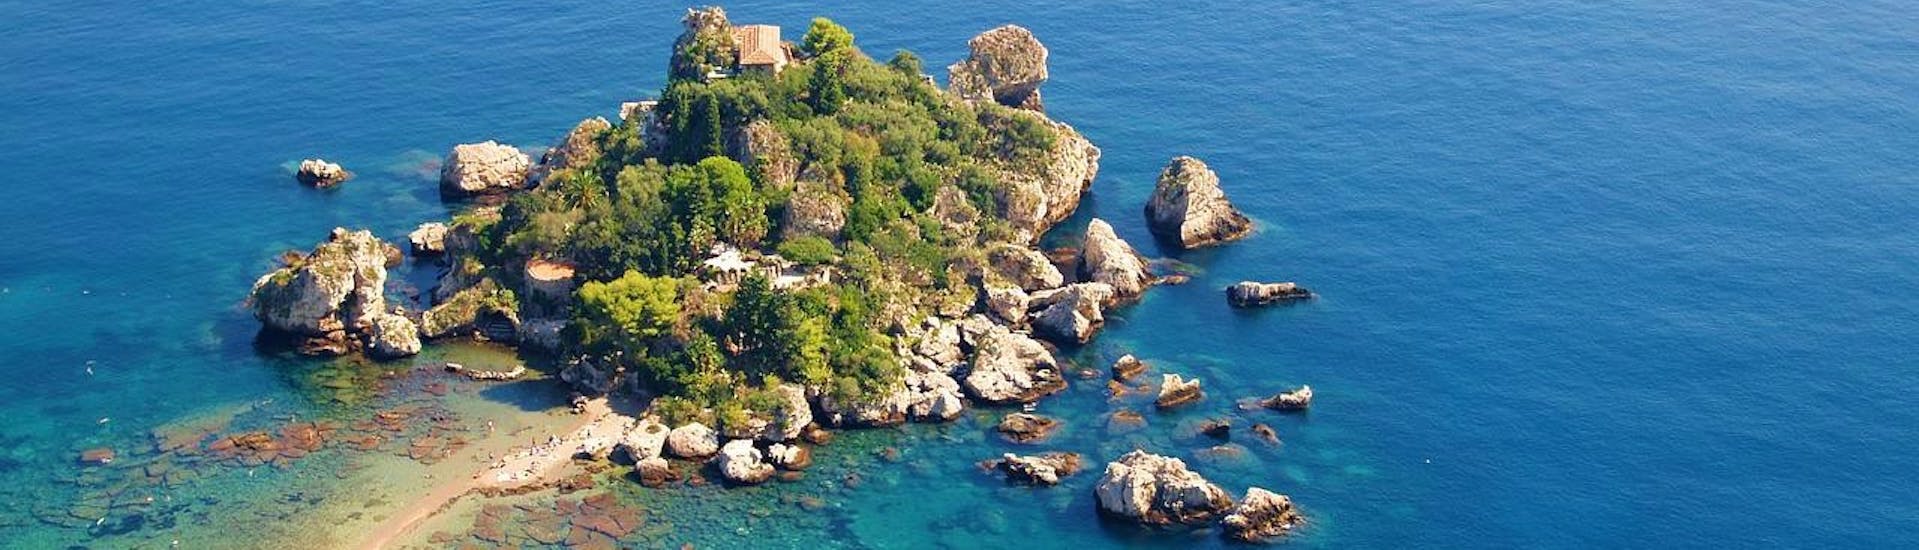 Beautiful photo of Isola Bella, which you can visit during our boat trip from Giardini Naxos along the Taormina coast with Enjoy Sicily.